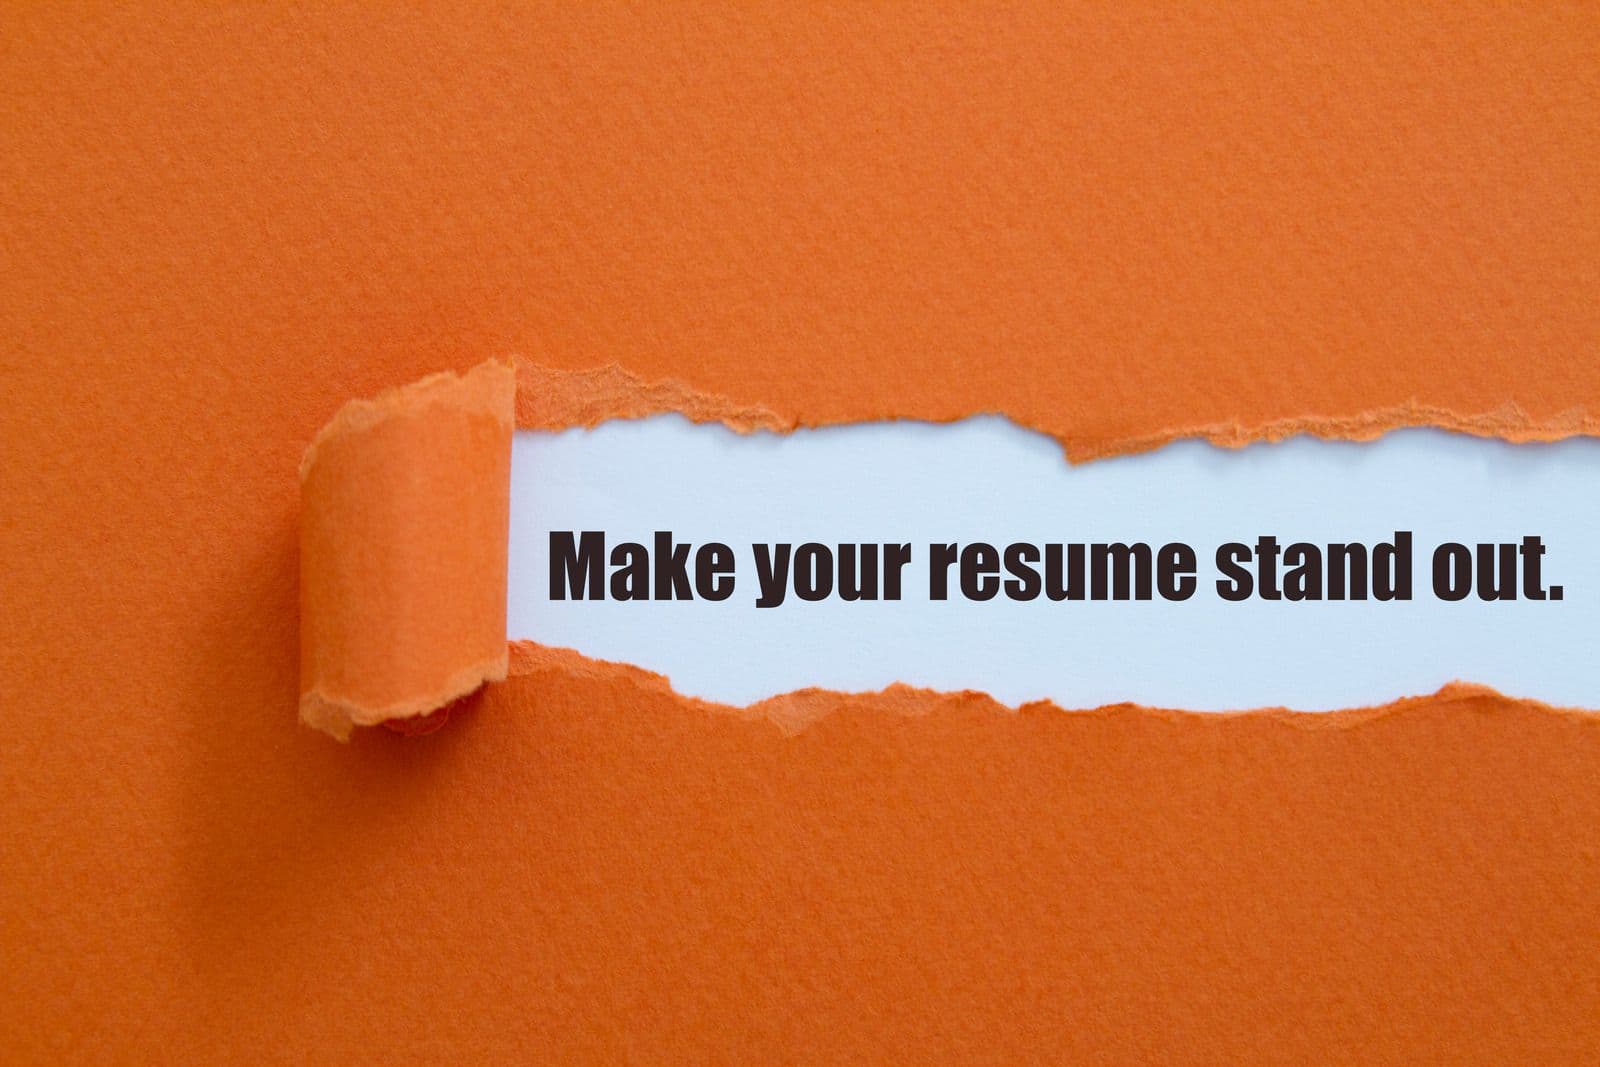 Crafting the Perfect Resume: Expert Tips for Standing Out to Hiring Managers